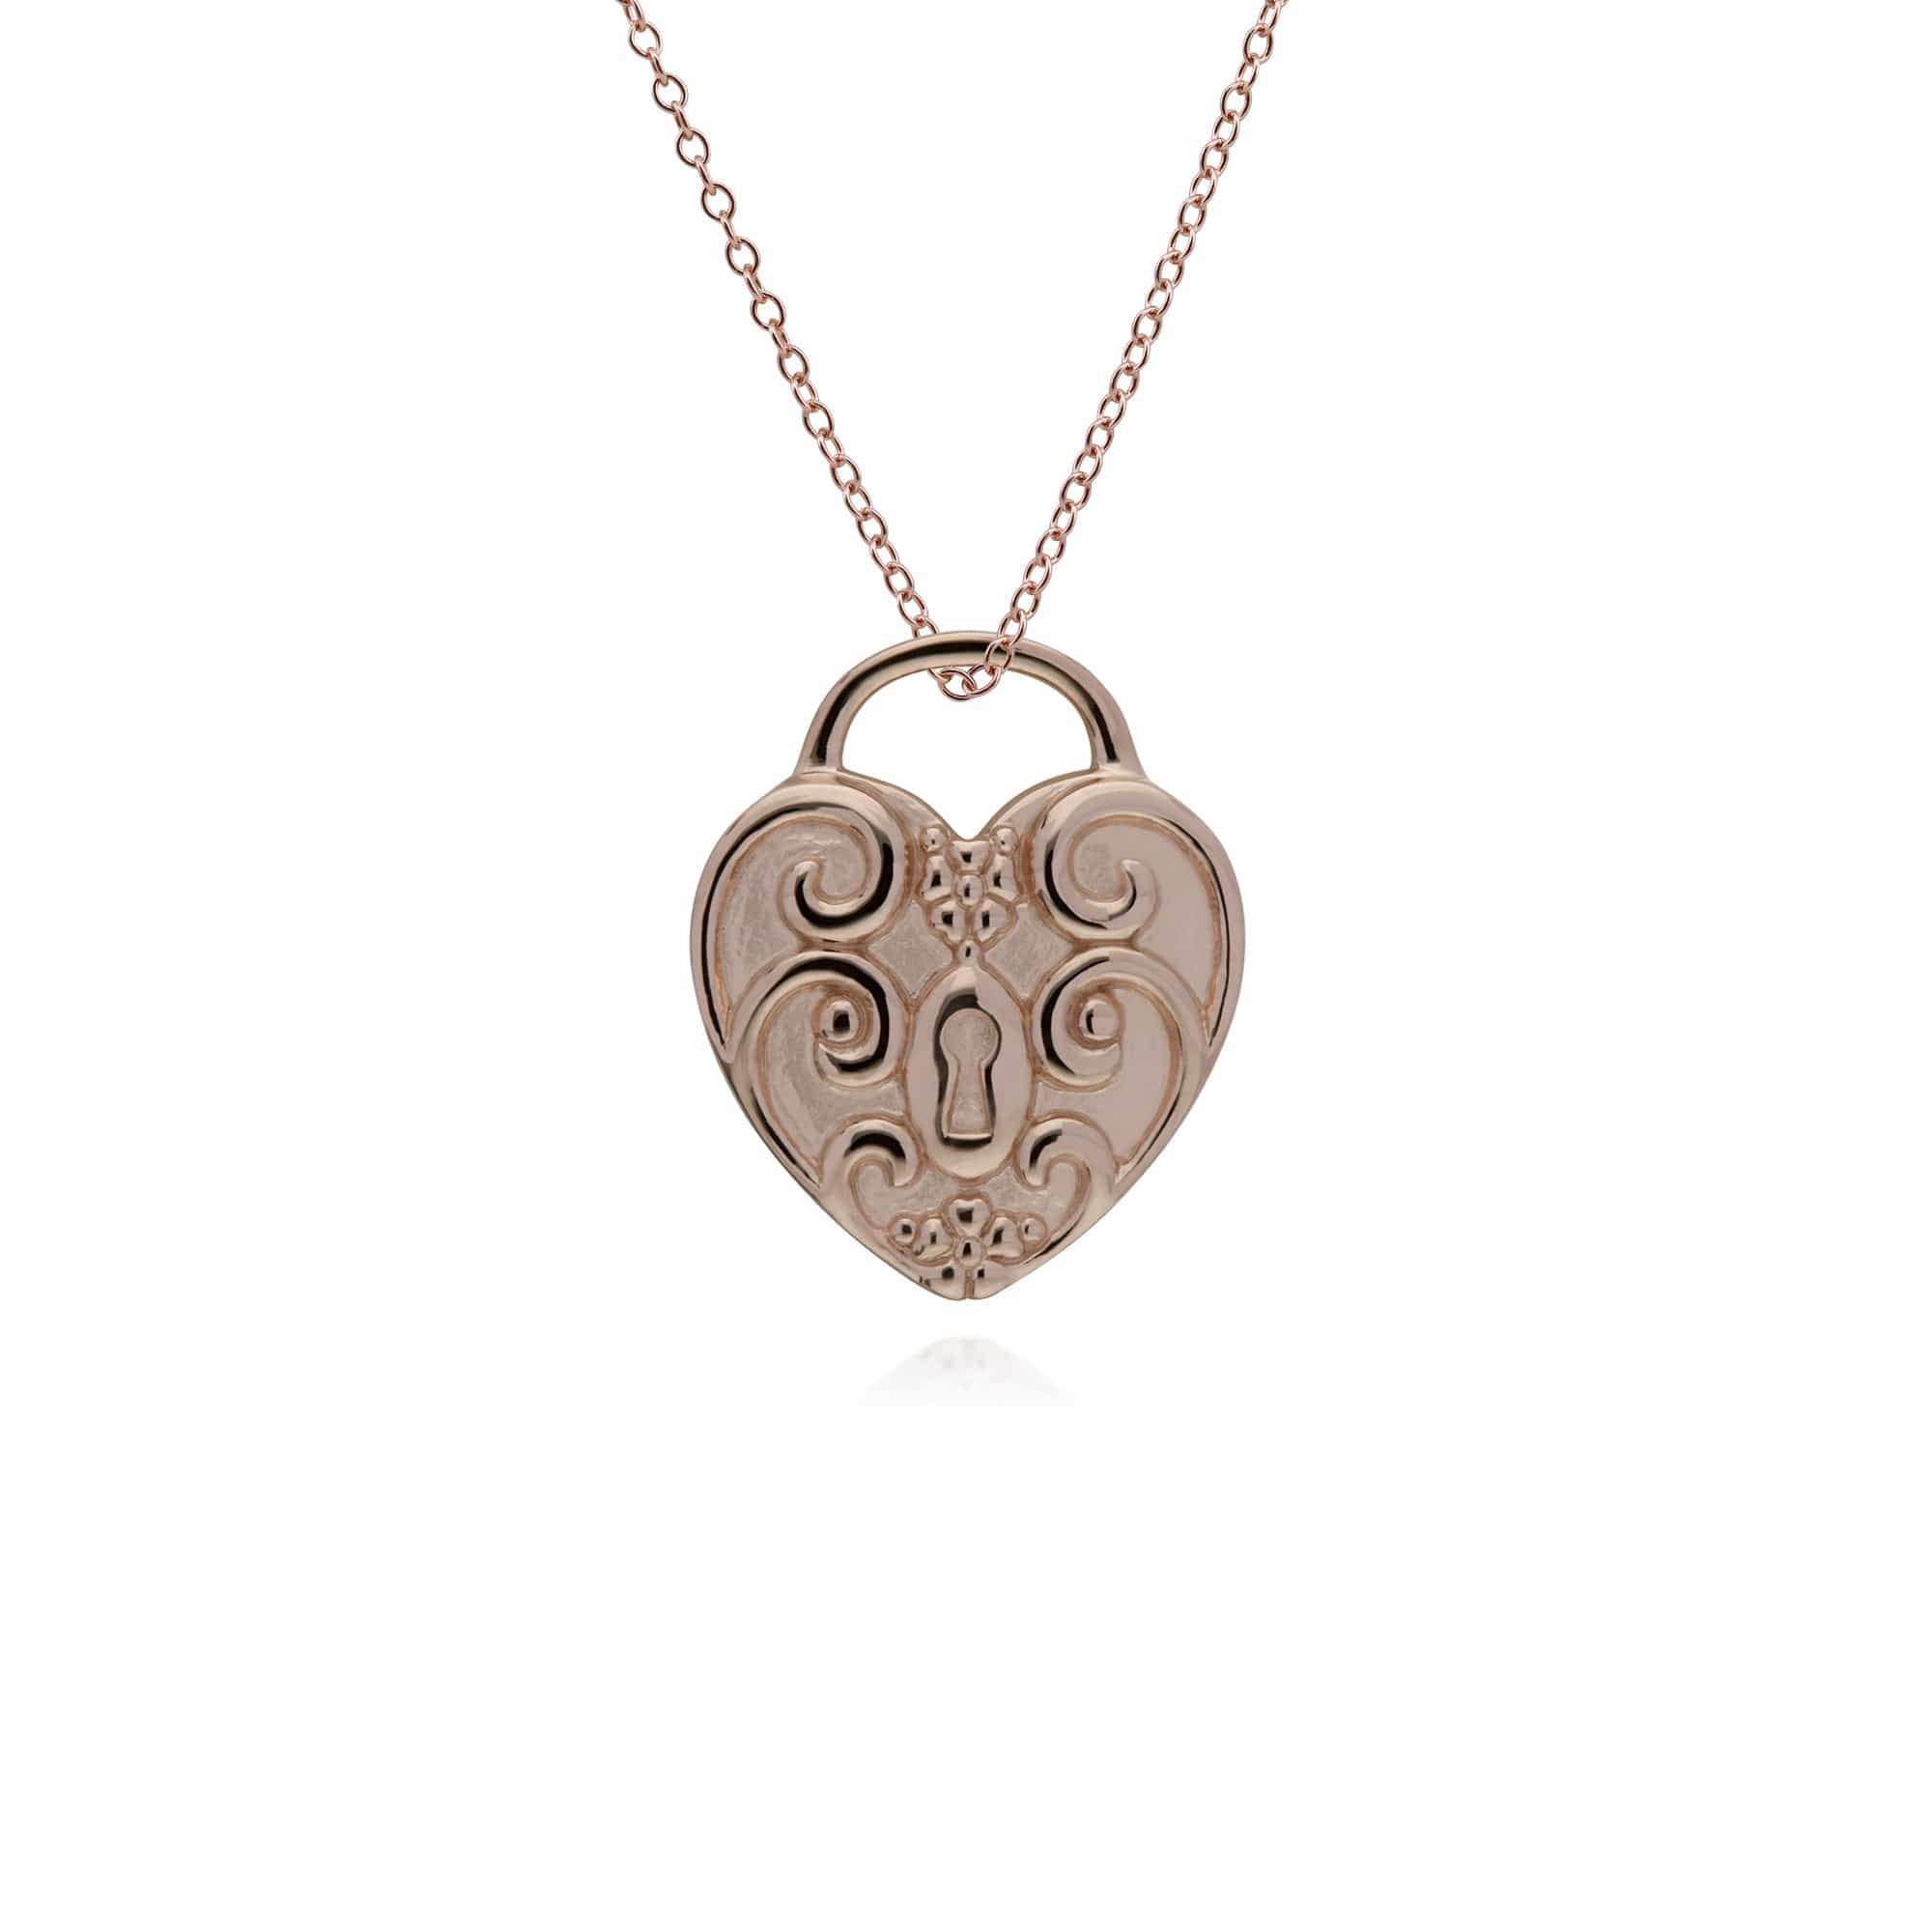 270P026501925 Classic Rose Gold Plated Swirled Heart Padlock Charm Pendant in 925 Sterling Silver 1